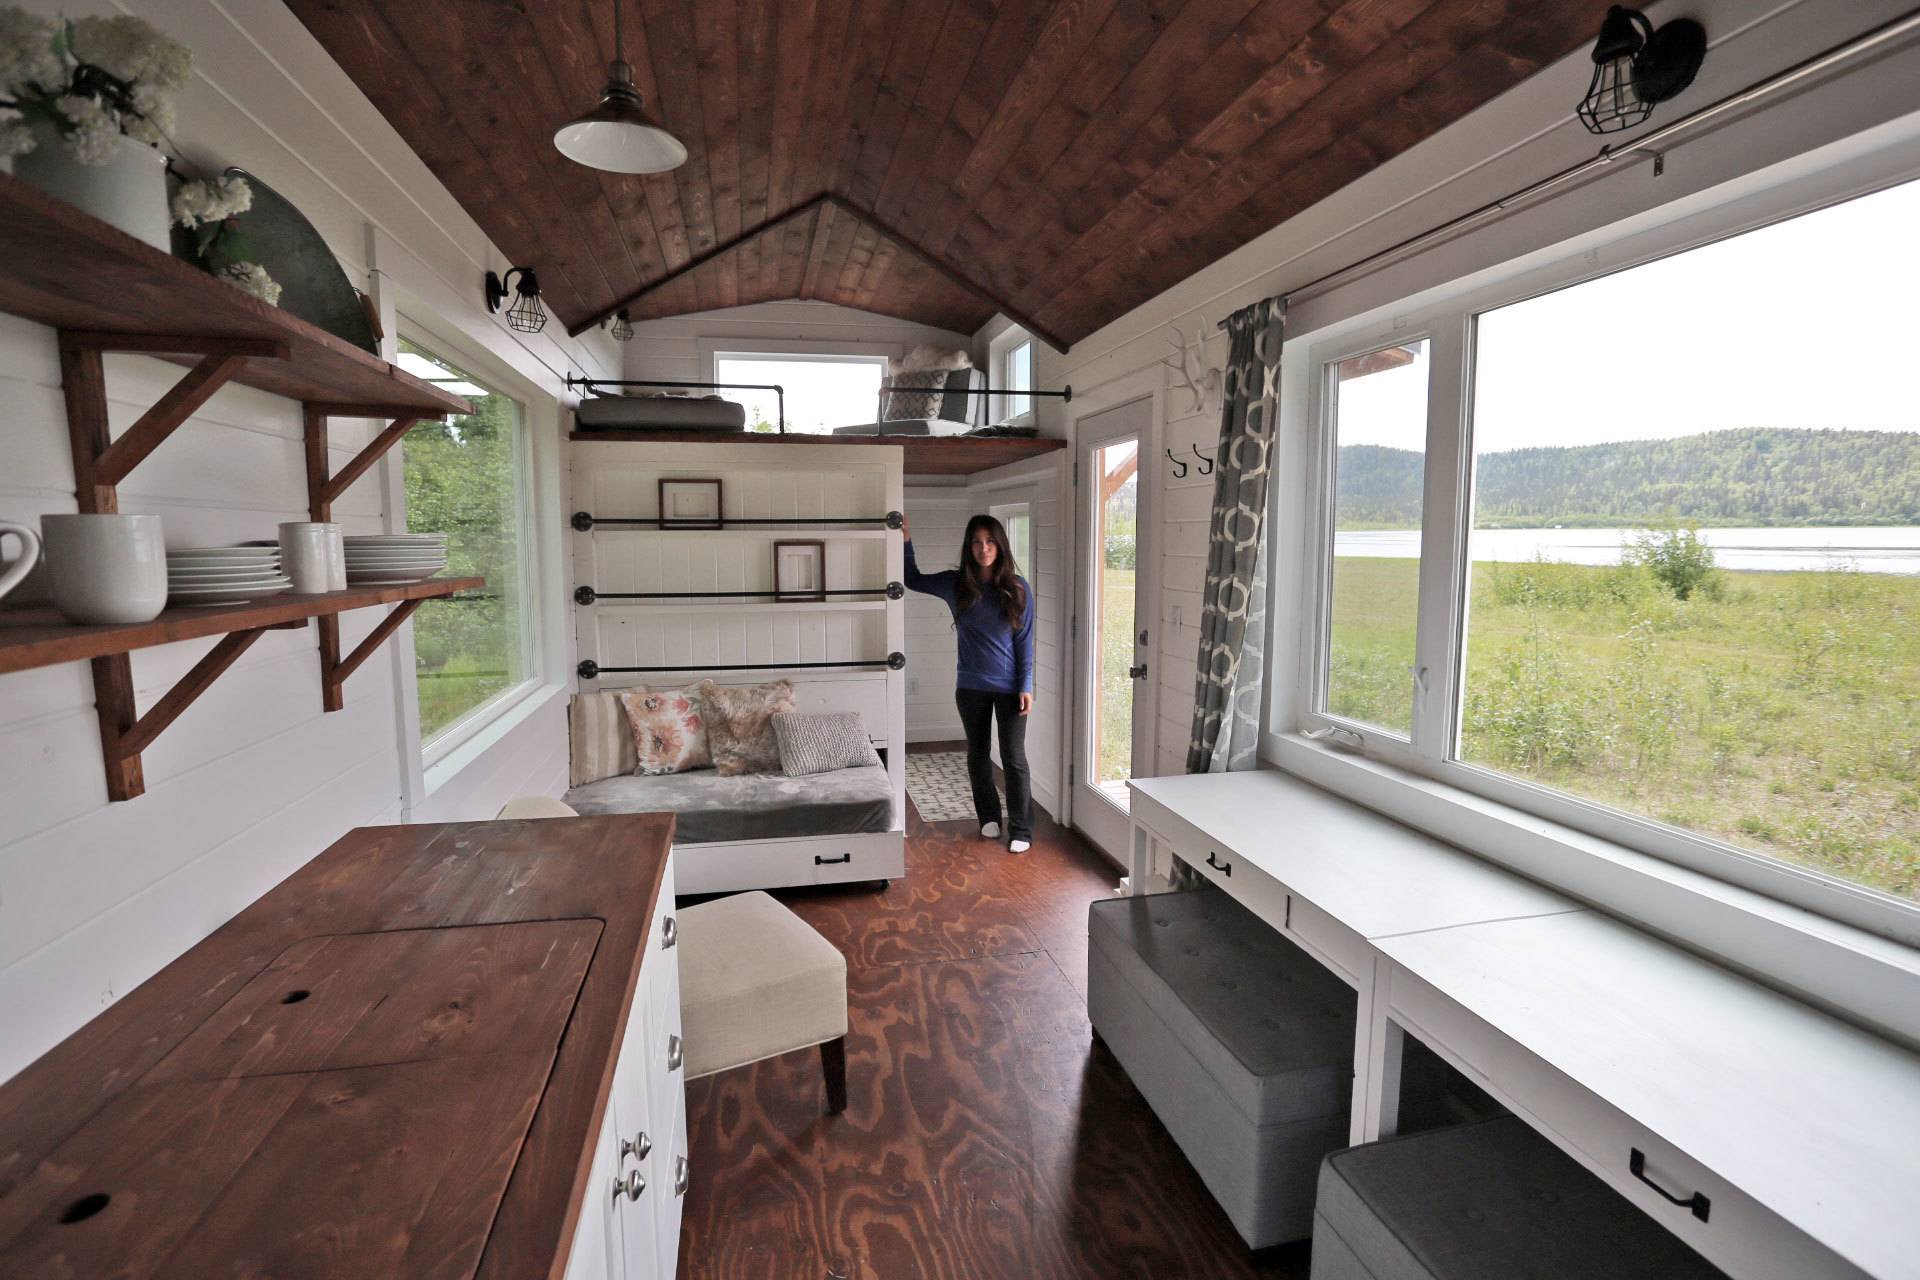 10 Tiny House Plans We Actually Want to Build